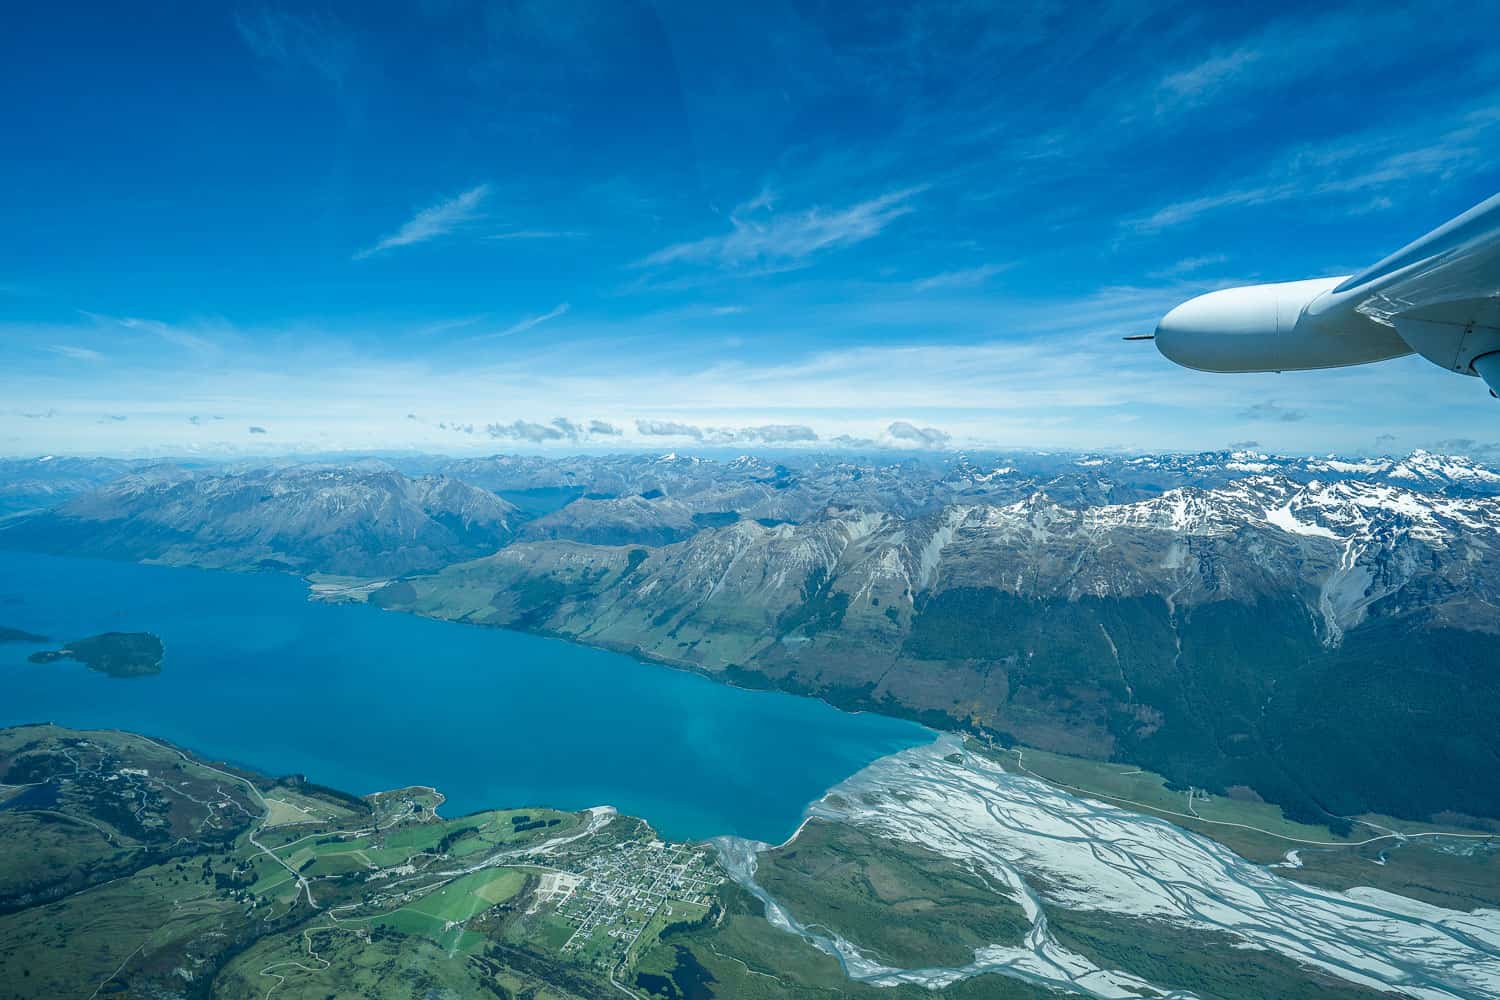 How to buy travel insurance when already abroad - flying over Queenstown, New Zealand